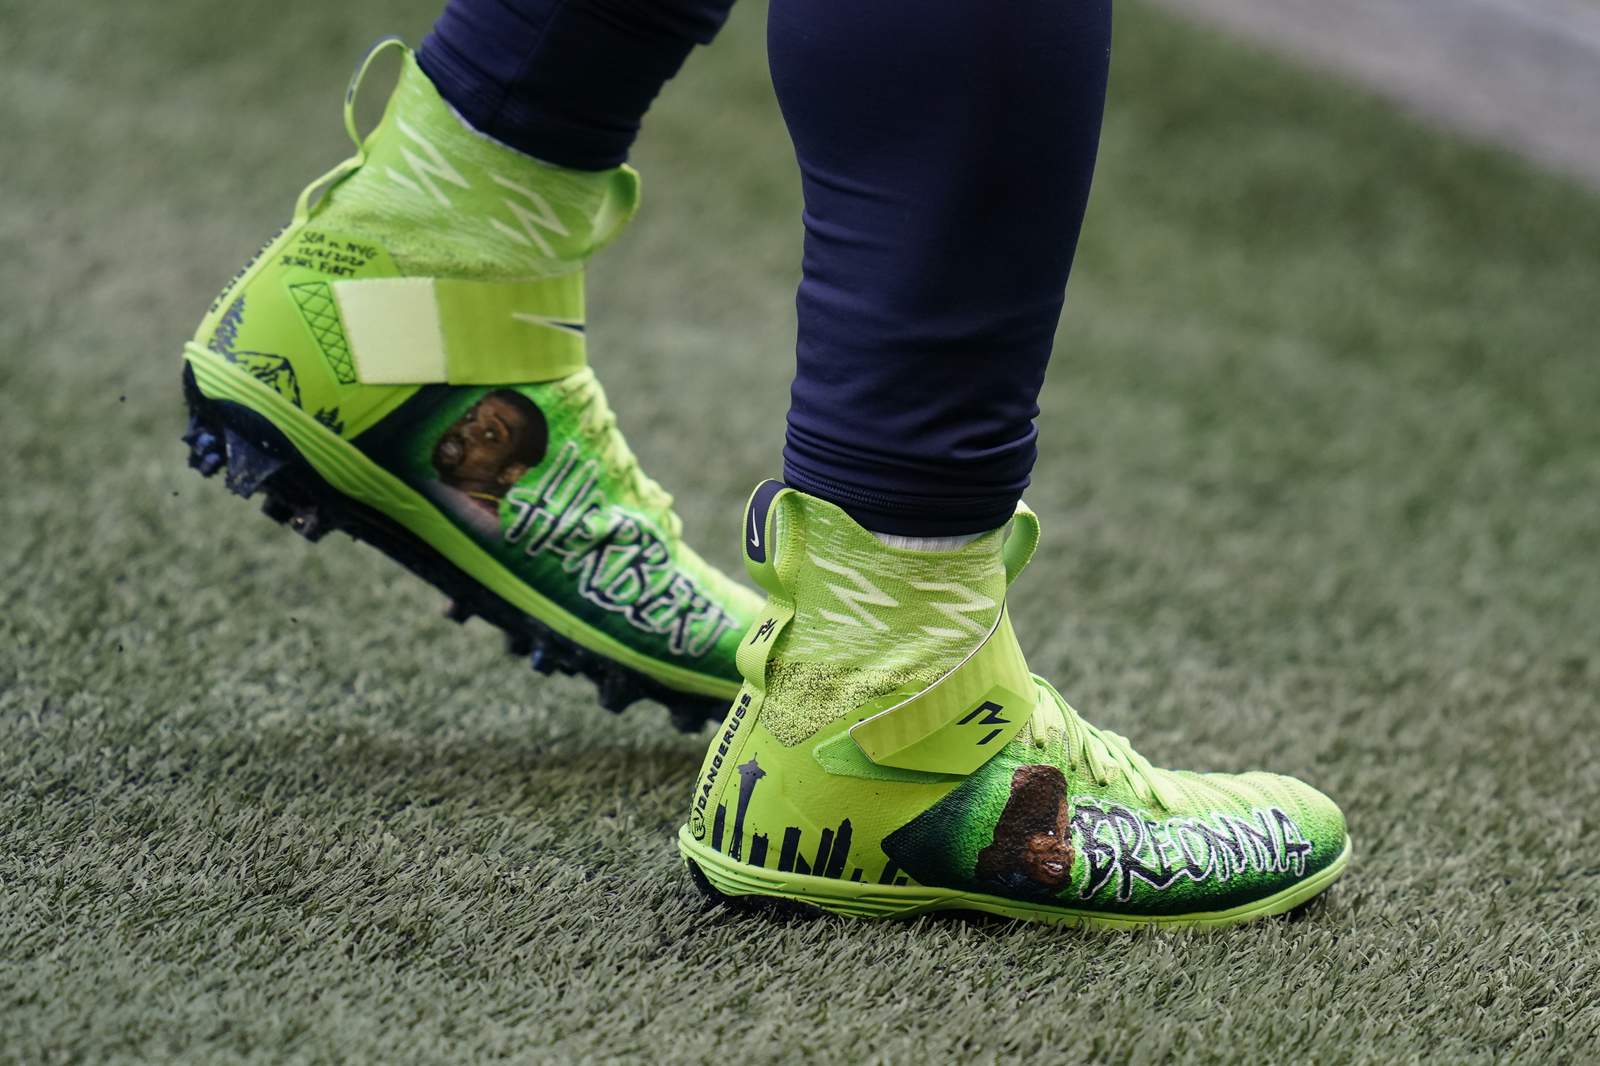 ‘My Cause My Cleats’ campaign has taken a foothold in NFL